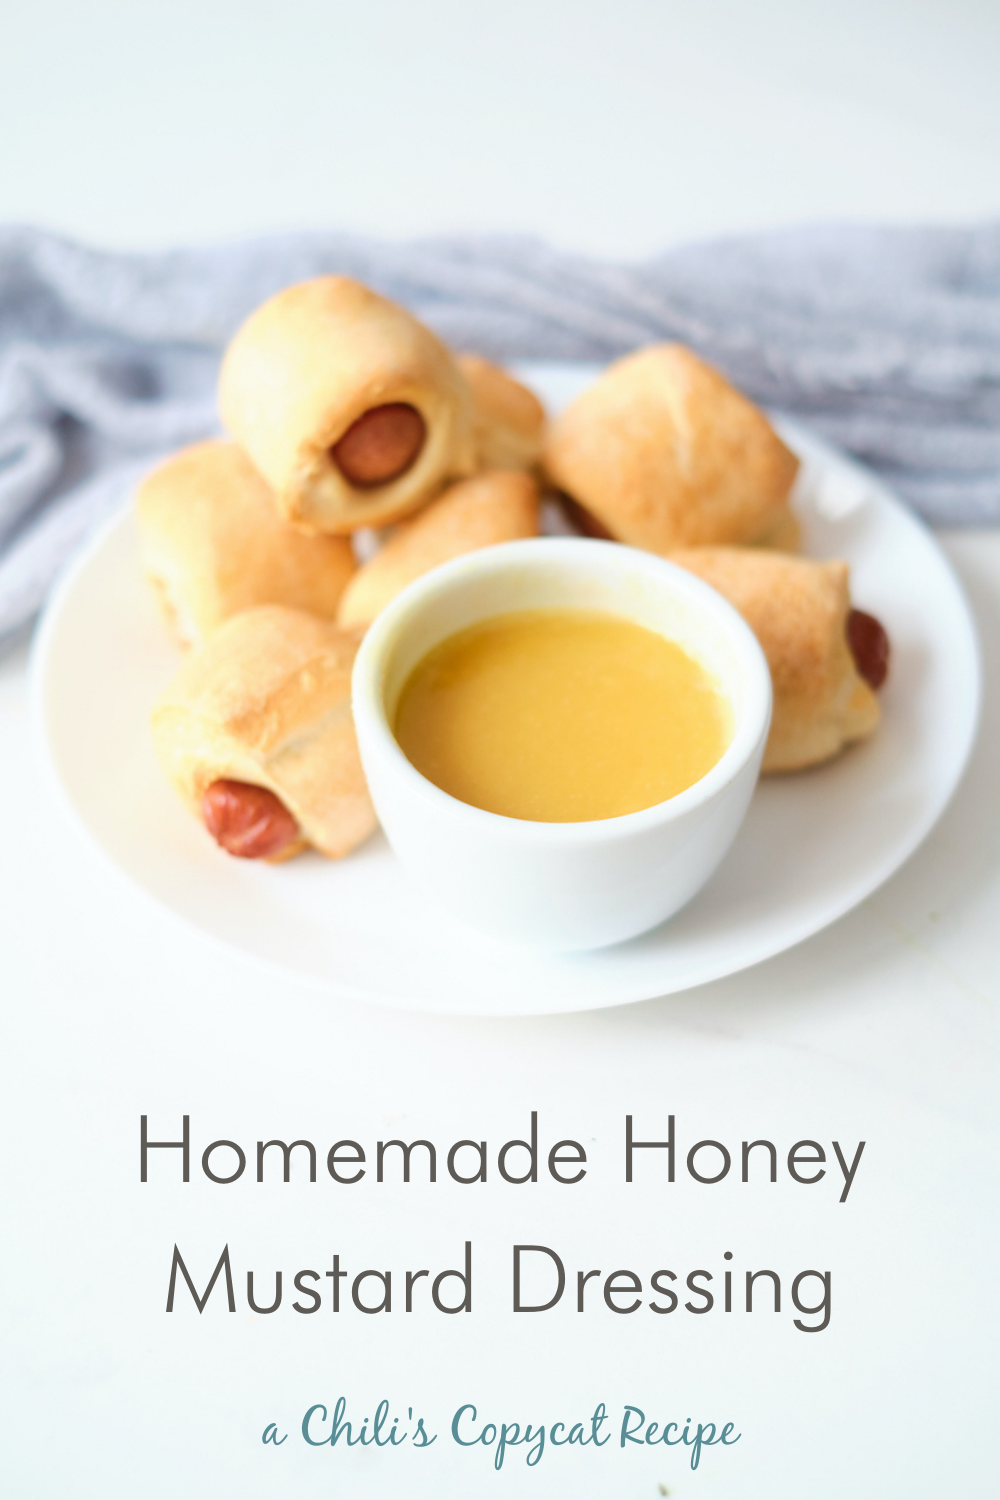 Three ingredients are all you need to make this delicious Homemade Honey Mustard Dressing recipe. Perfect as a dip or a salad dressing, this quick recipe will have you skipping the store-bought stuff from now on.